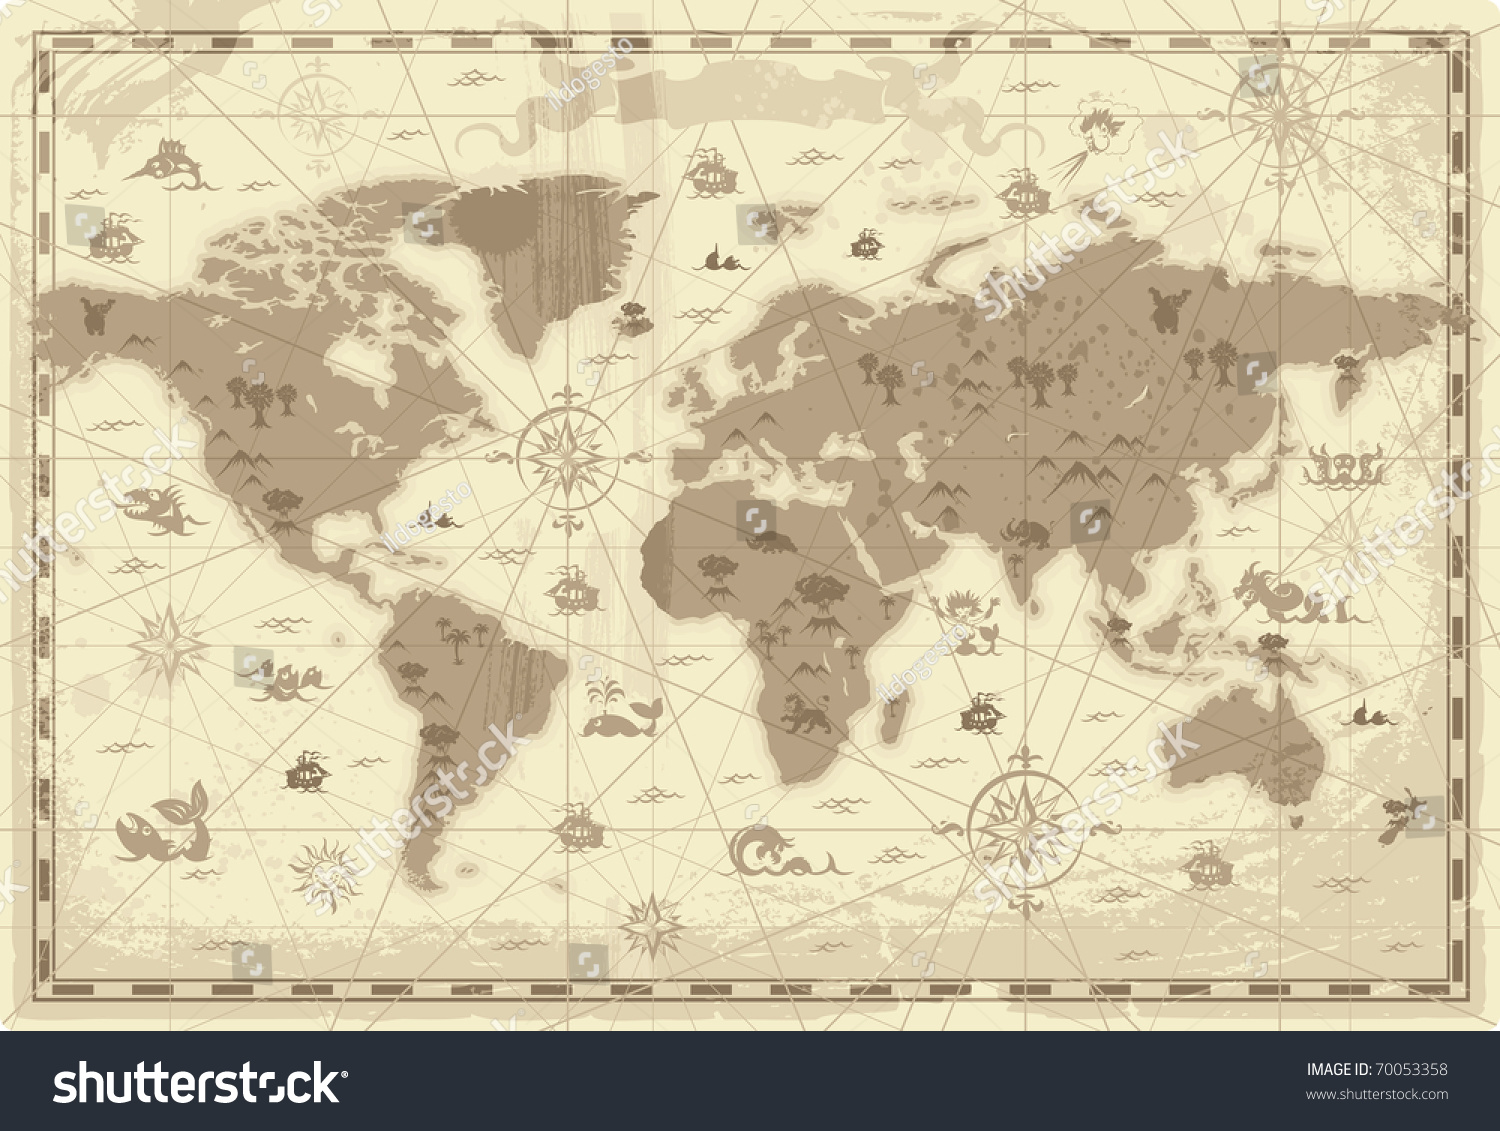 Retro-styled map of the World with mountains and fantasy monsters. Colored in sepia. Raster version. Vector version is also available. #70053358